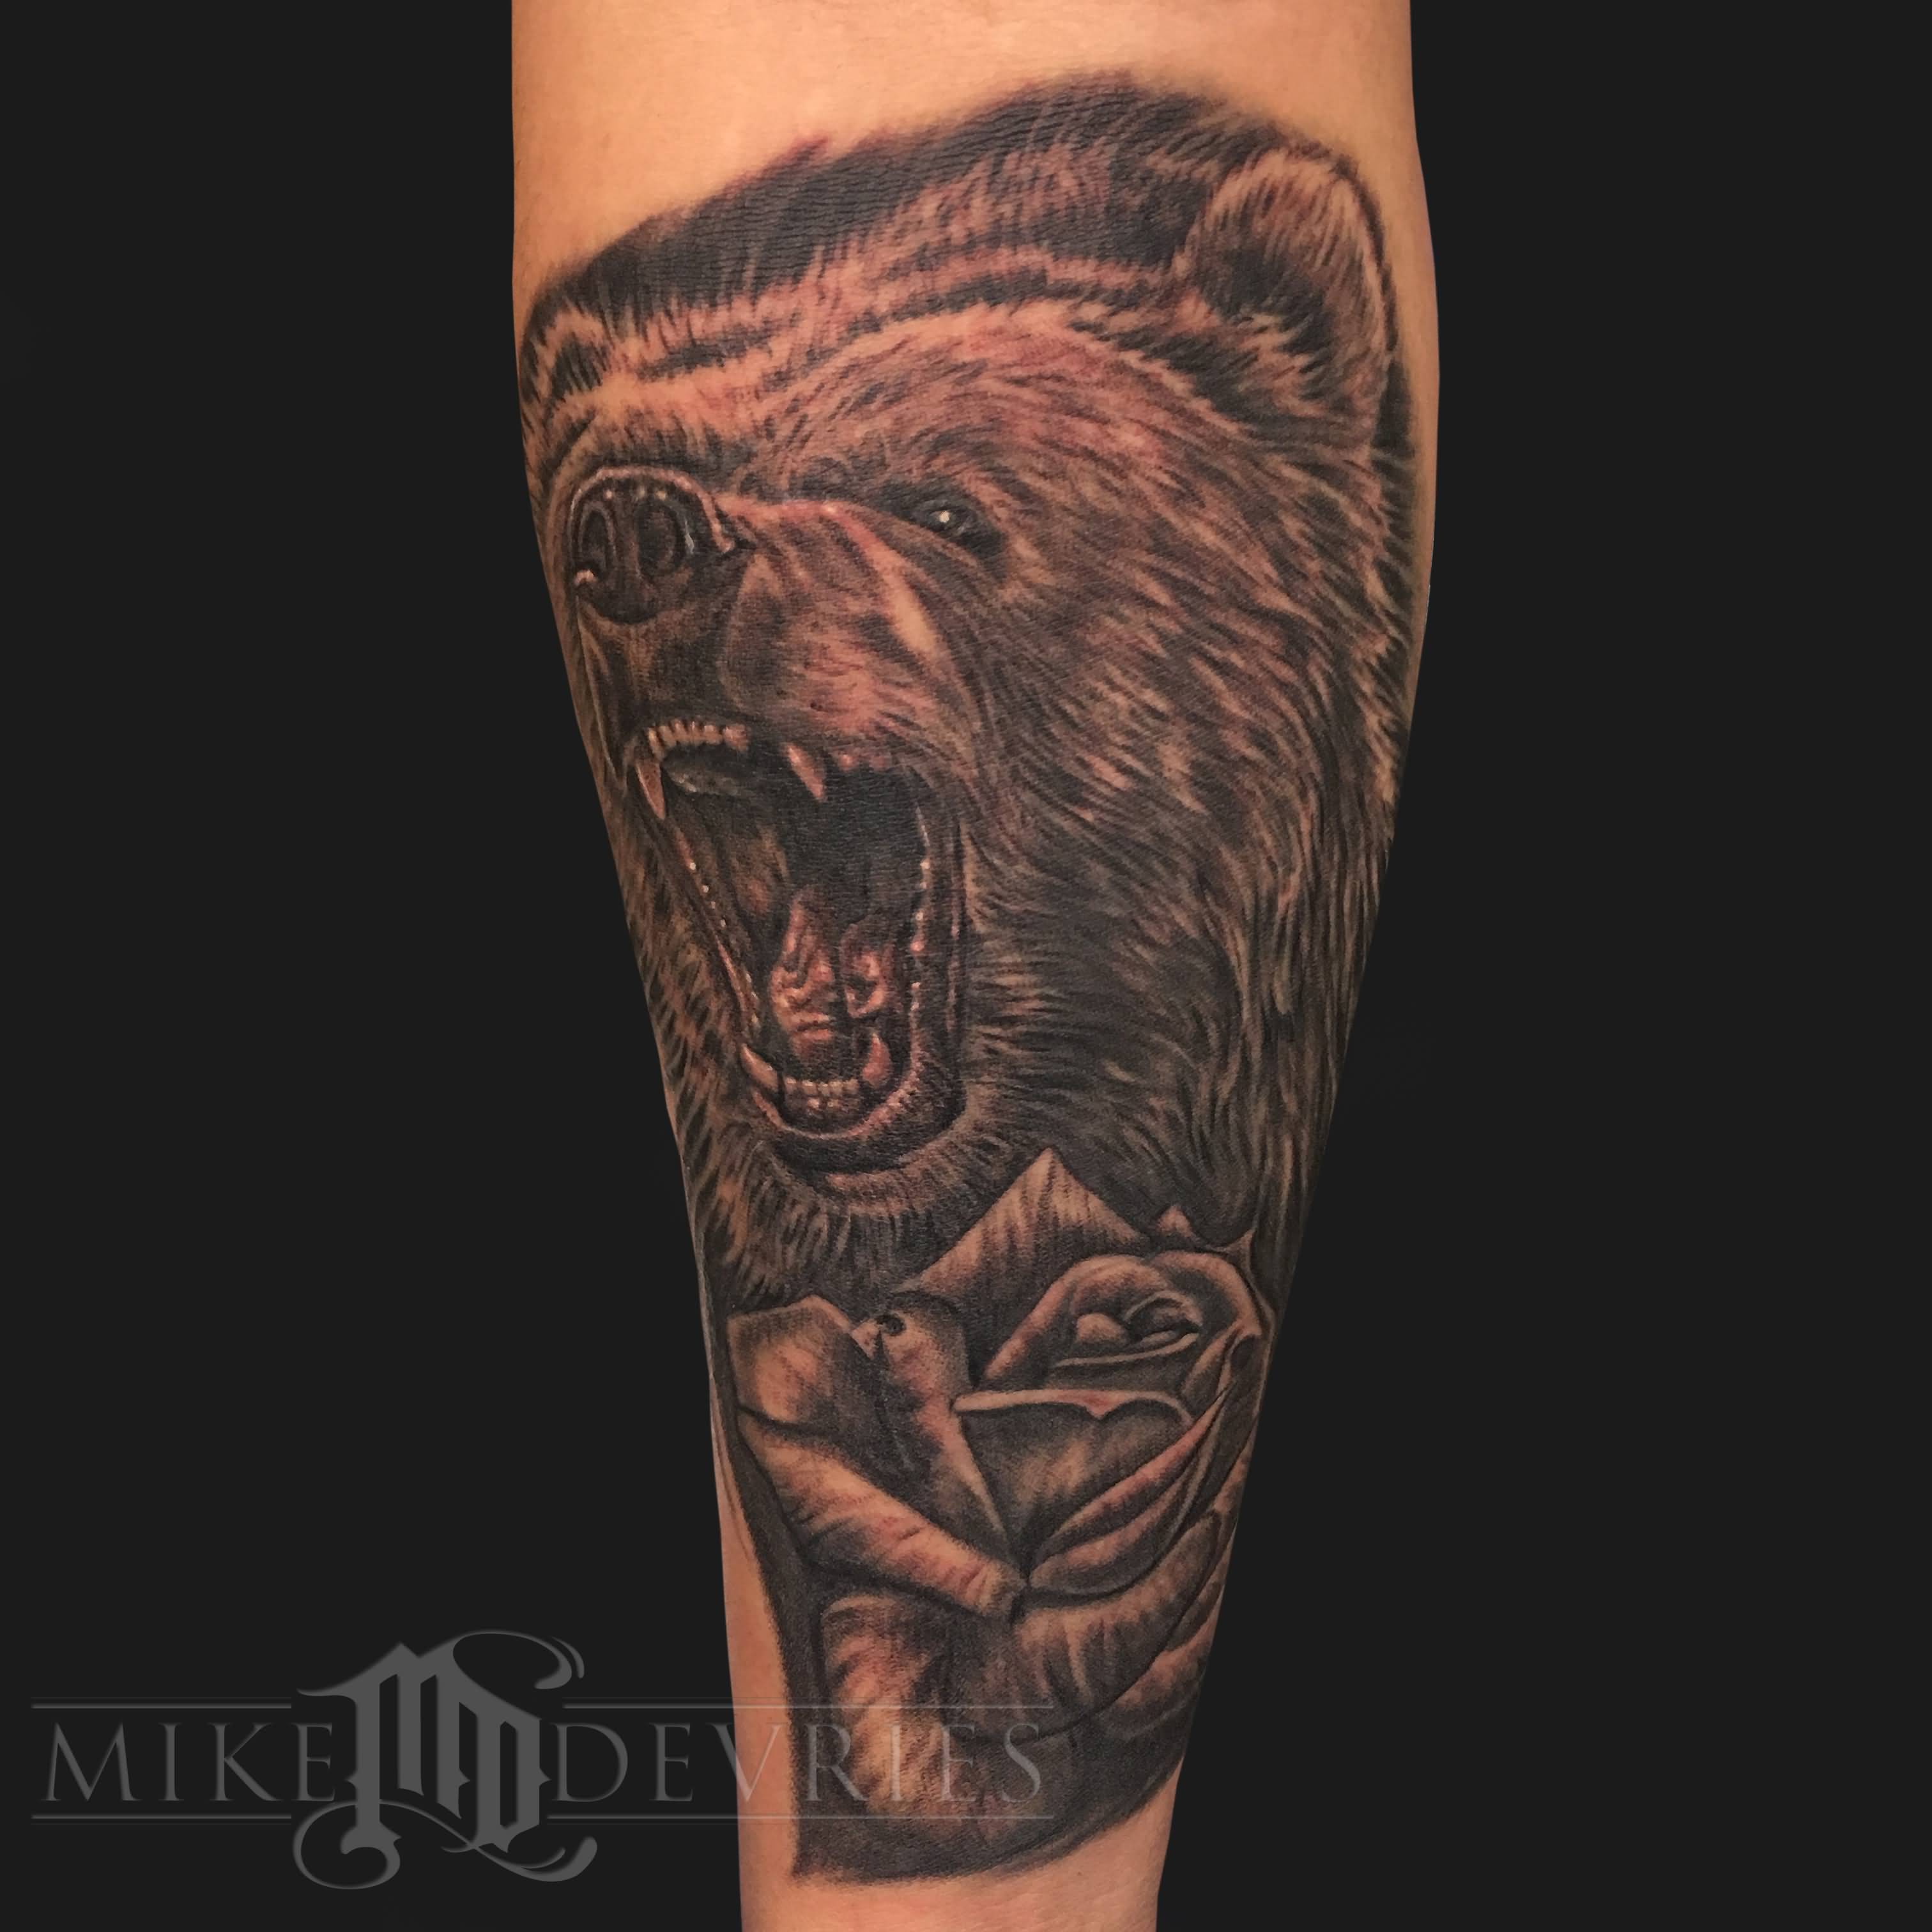 Black Ink Roaring Bear Head With Rose Tattoo On Forearm By Mike